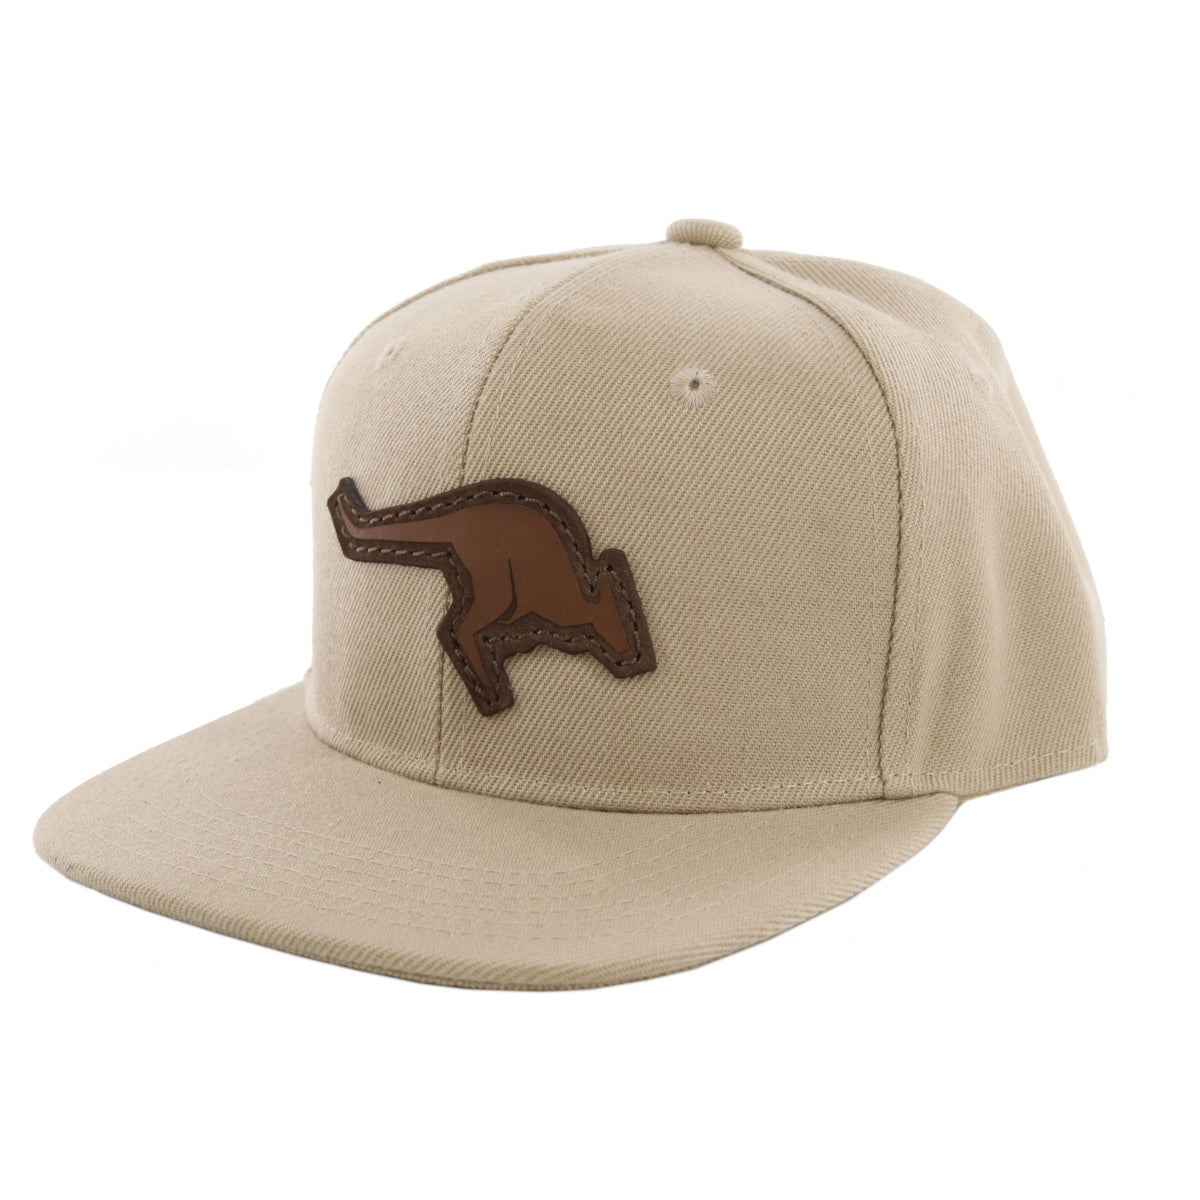 Youth Hat - Youth Kangaroo Leather Patch